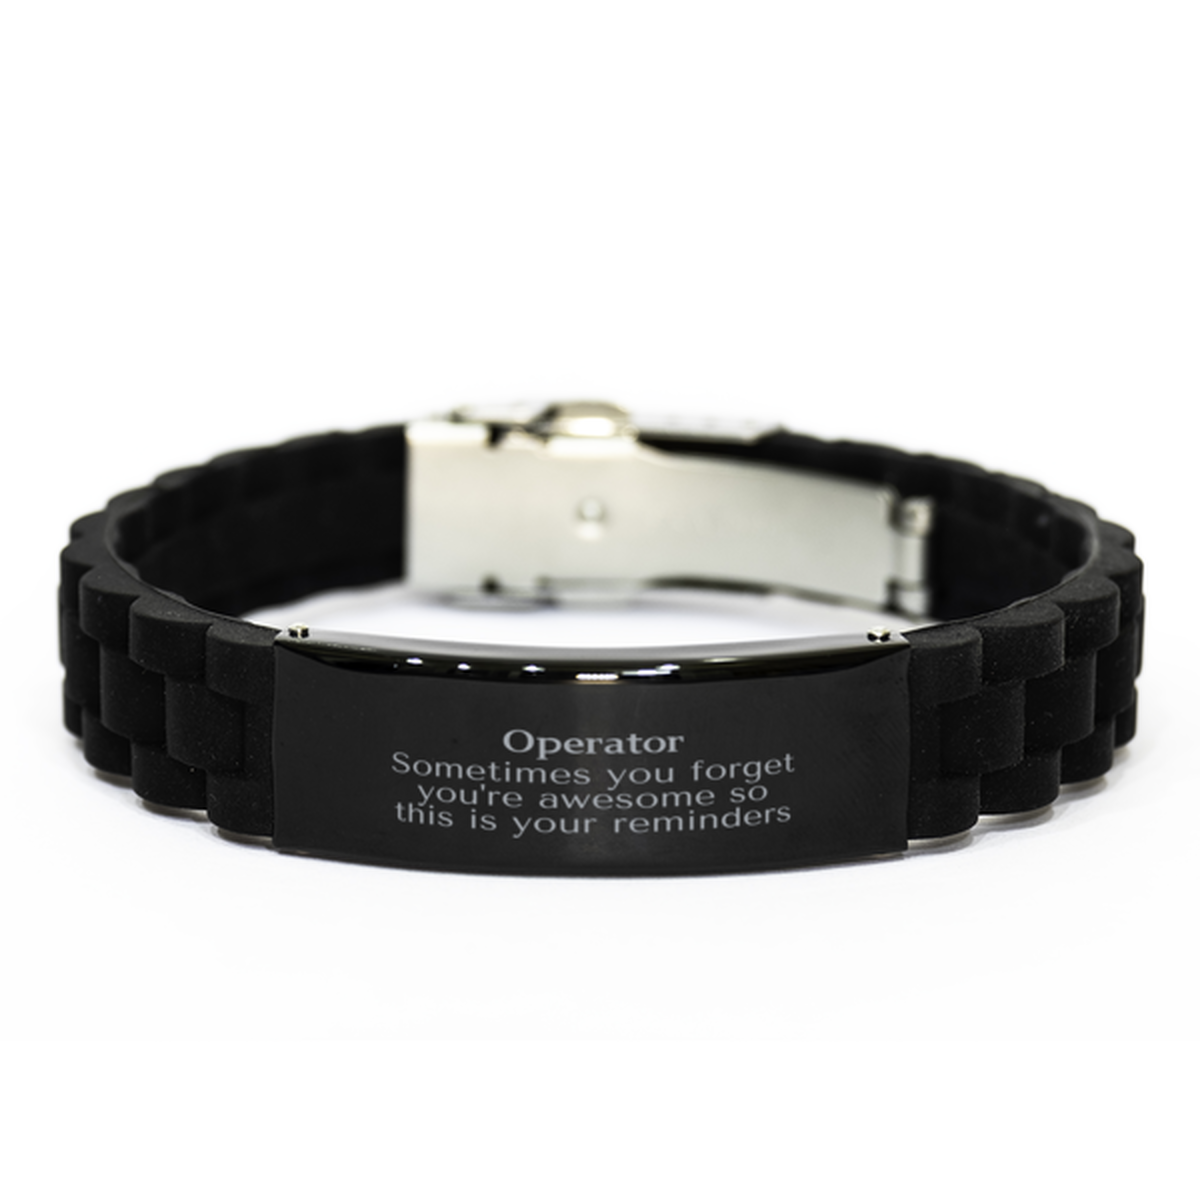 Sentimental Operator Black Glidelock Clasp Bracelet, Operator Sometimes you forget you're awesome so this is your reminders, Graduation Christmas Birthday Gifts for Operator, Men, Women, Coworkers